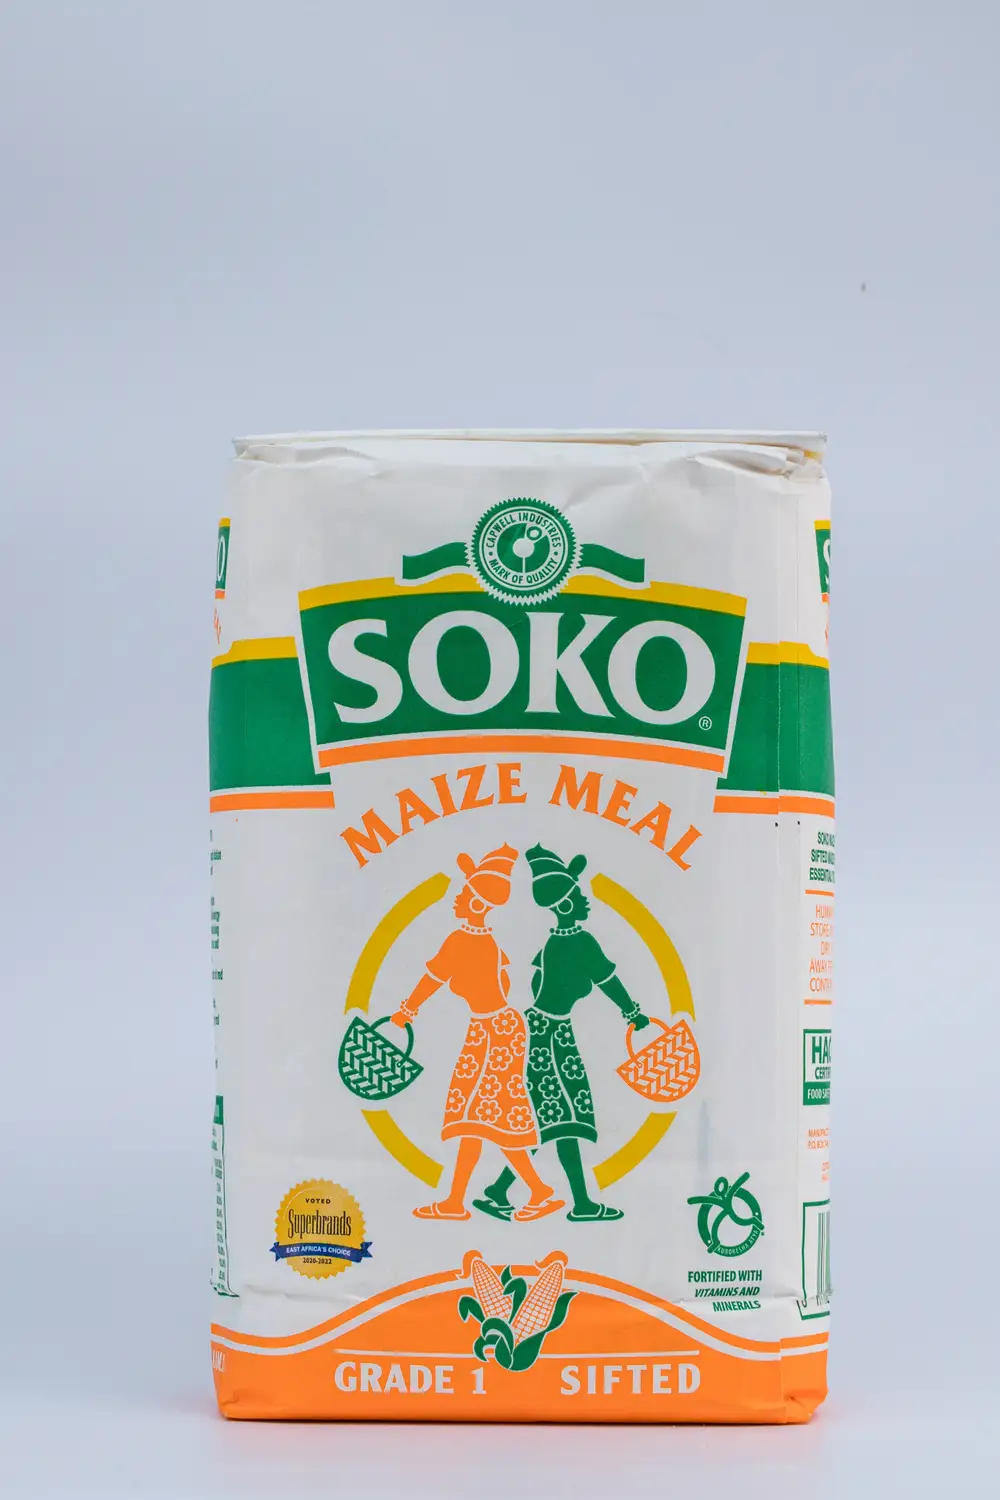 Pack of maize meal on white background